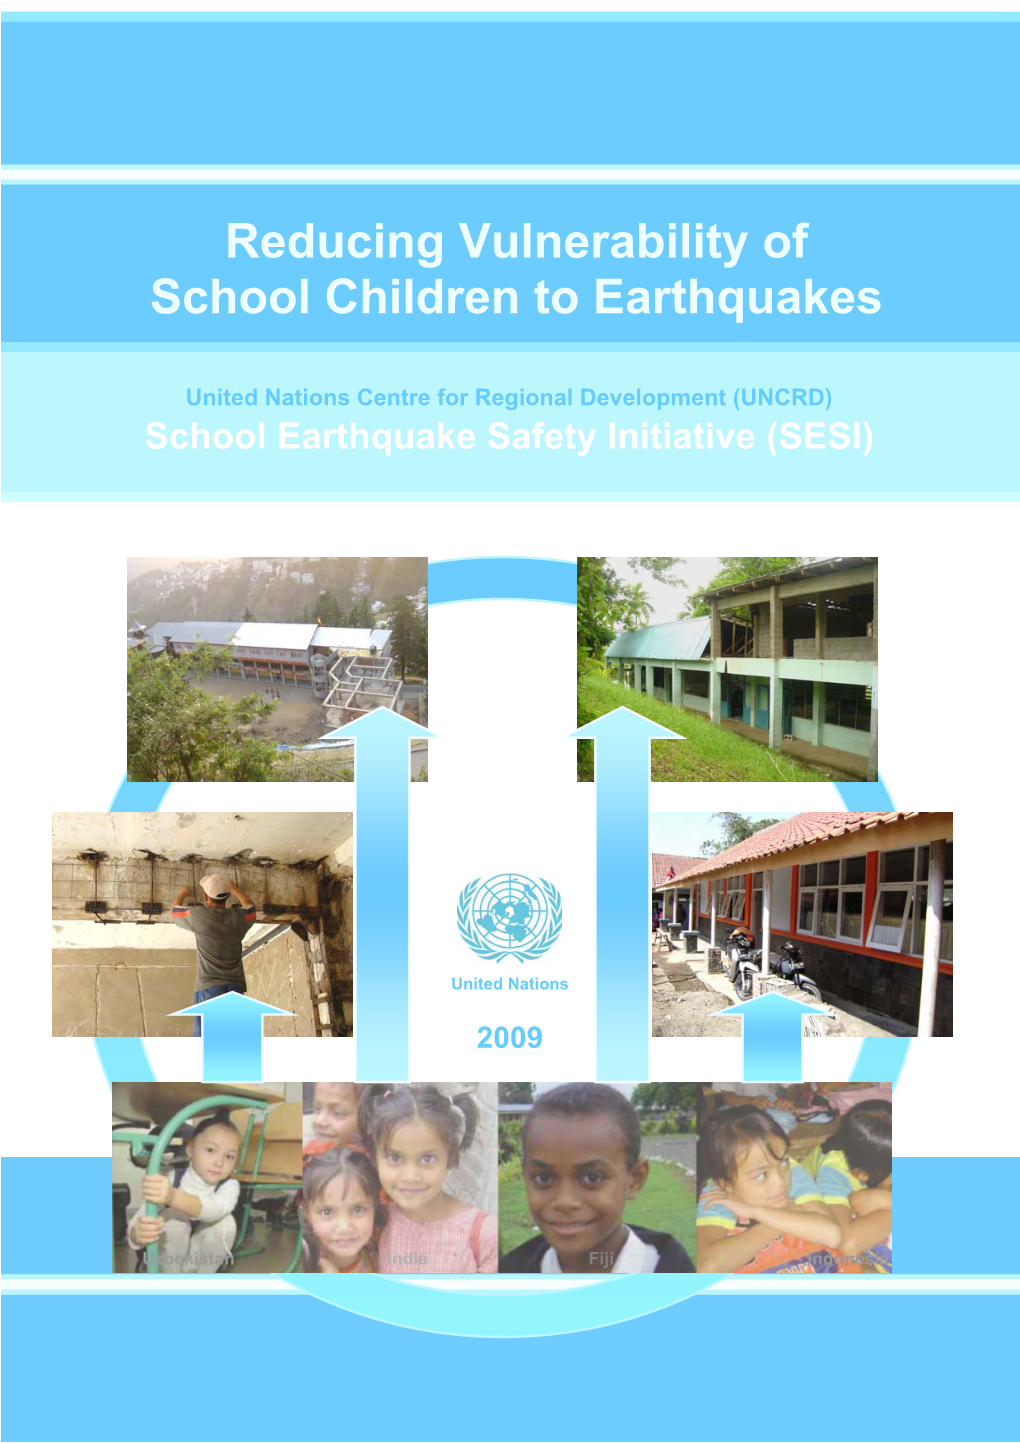 Reducing Vulnerability of School Children to Earthquakes